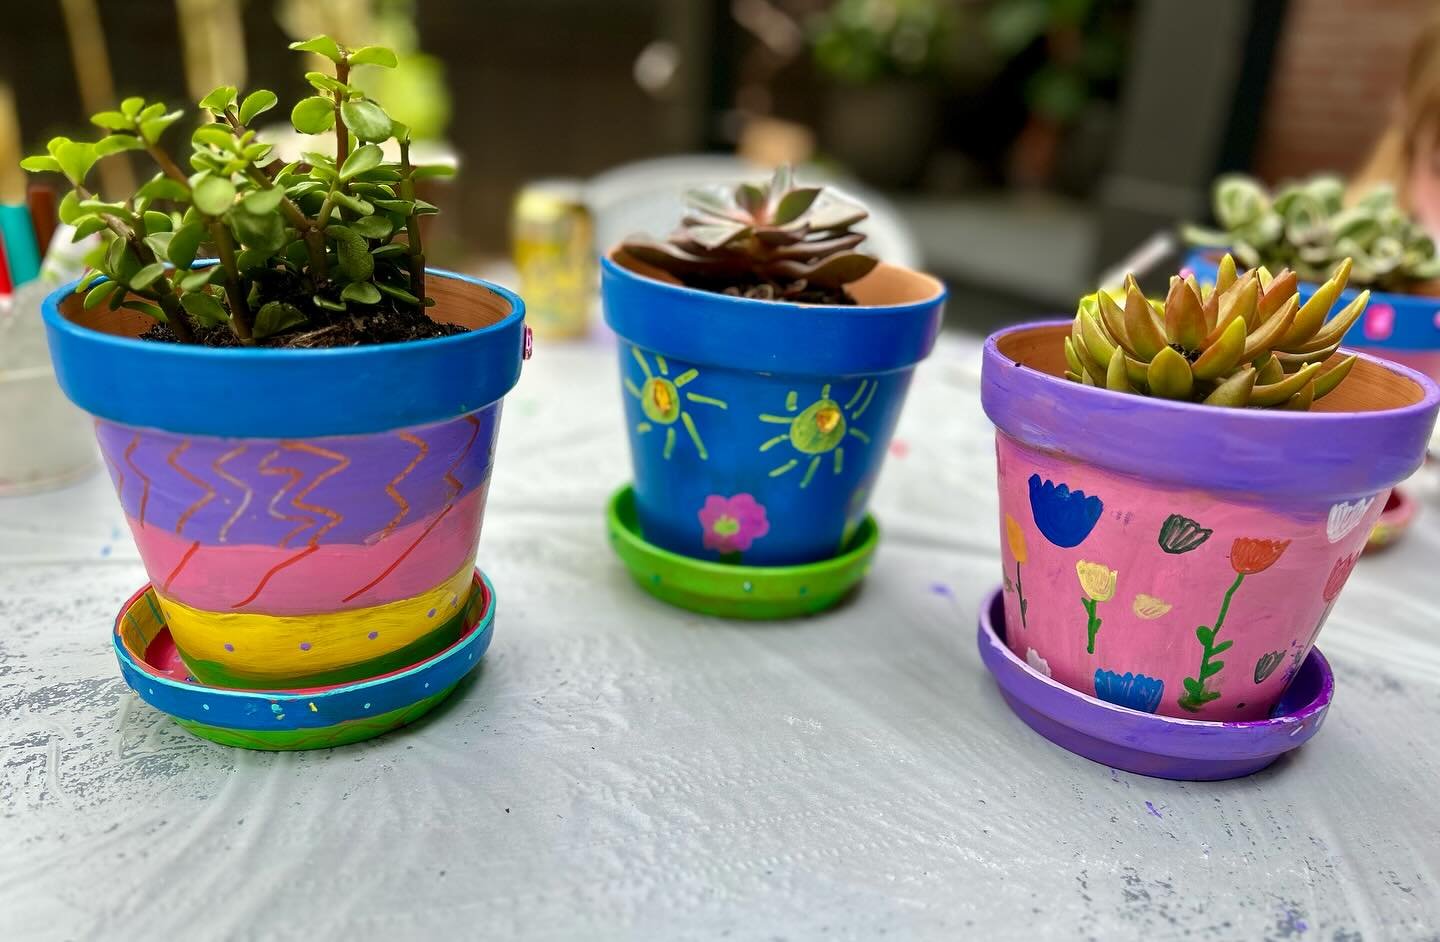 Nothing says Spring quite like beautifully hand painted pots and fresh plants right?! We had the best time running a special class yesterday afternoon with the sweetest crew. When you&rsquo;re planning your next event, keep us in mind! 🖌️🎉❤️